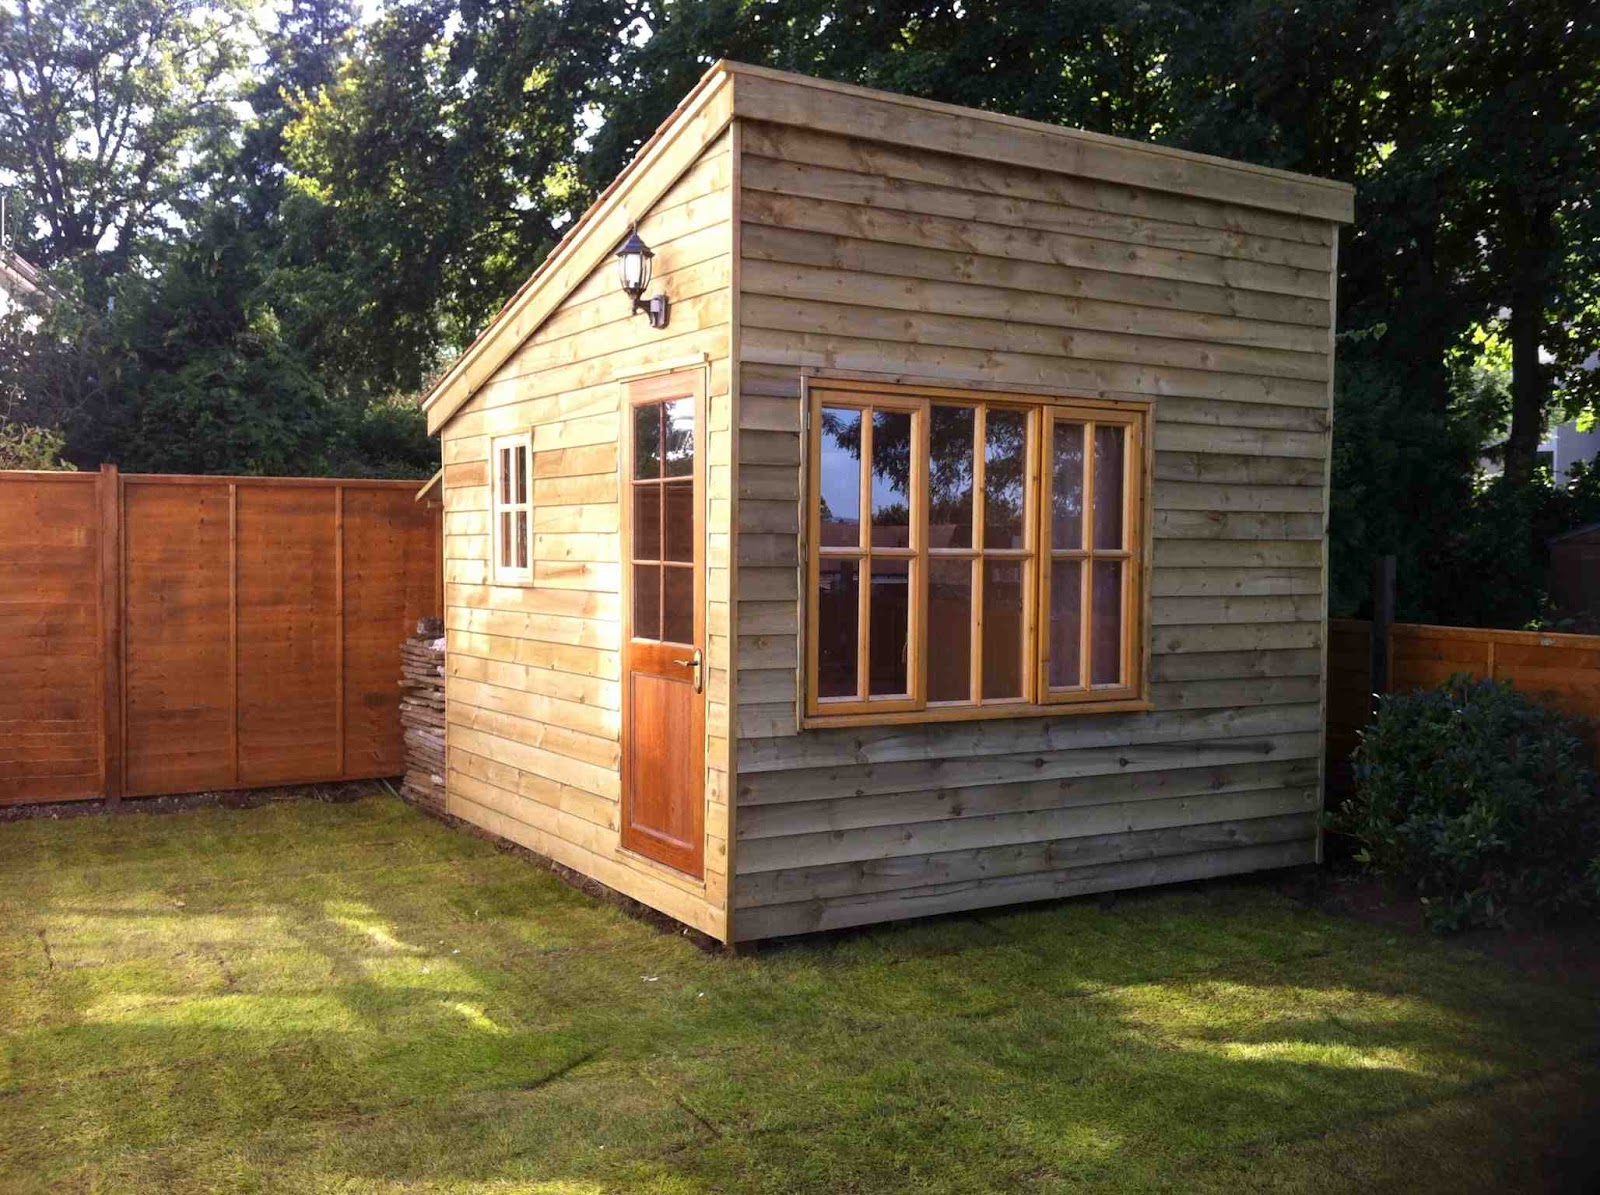  of Improvement Leads Home: Building an Office Shed: Before and After